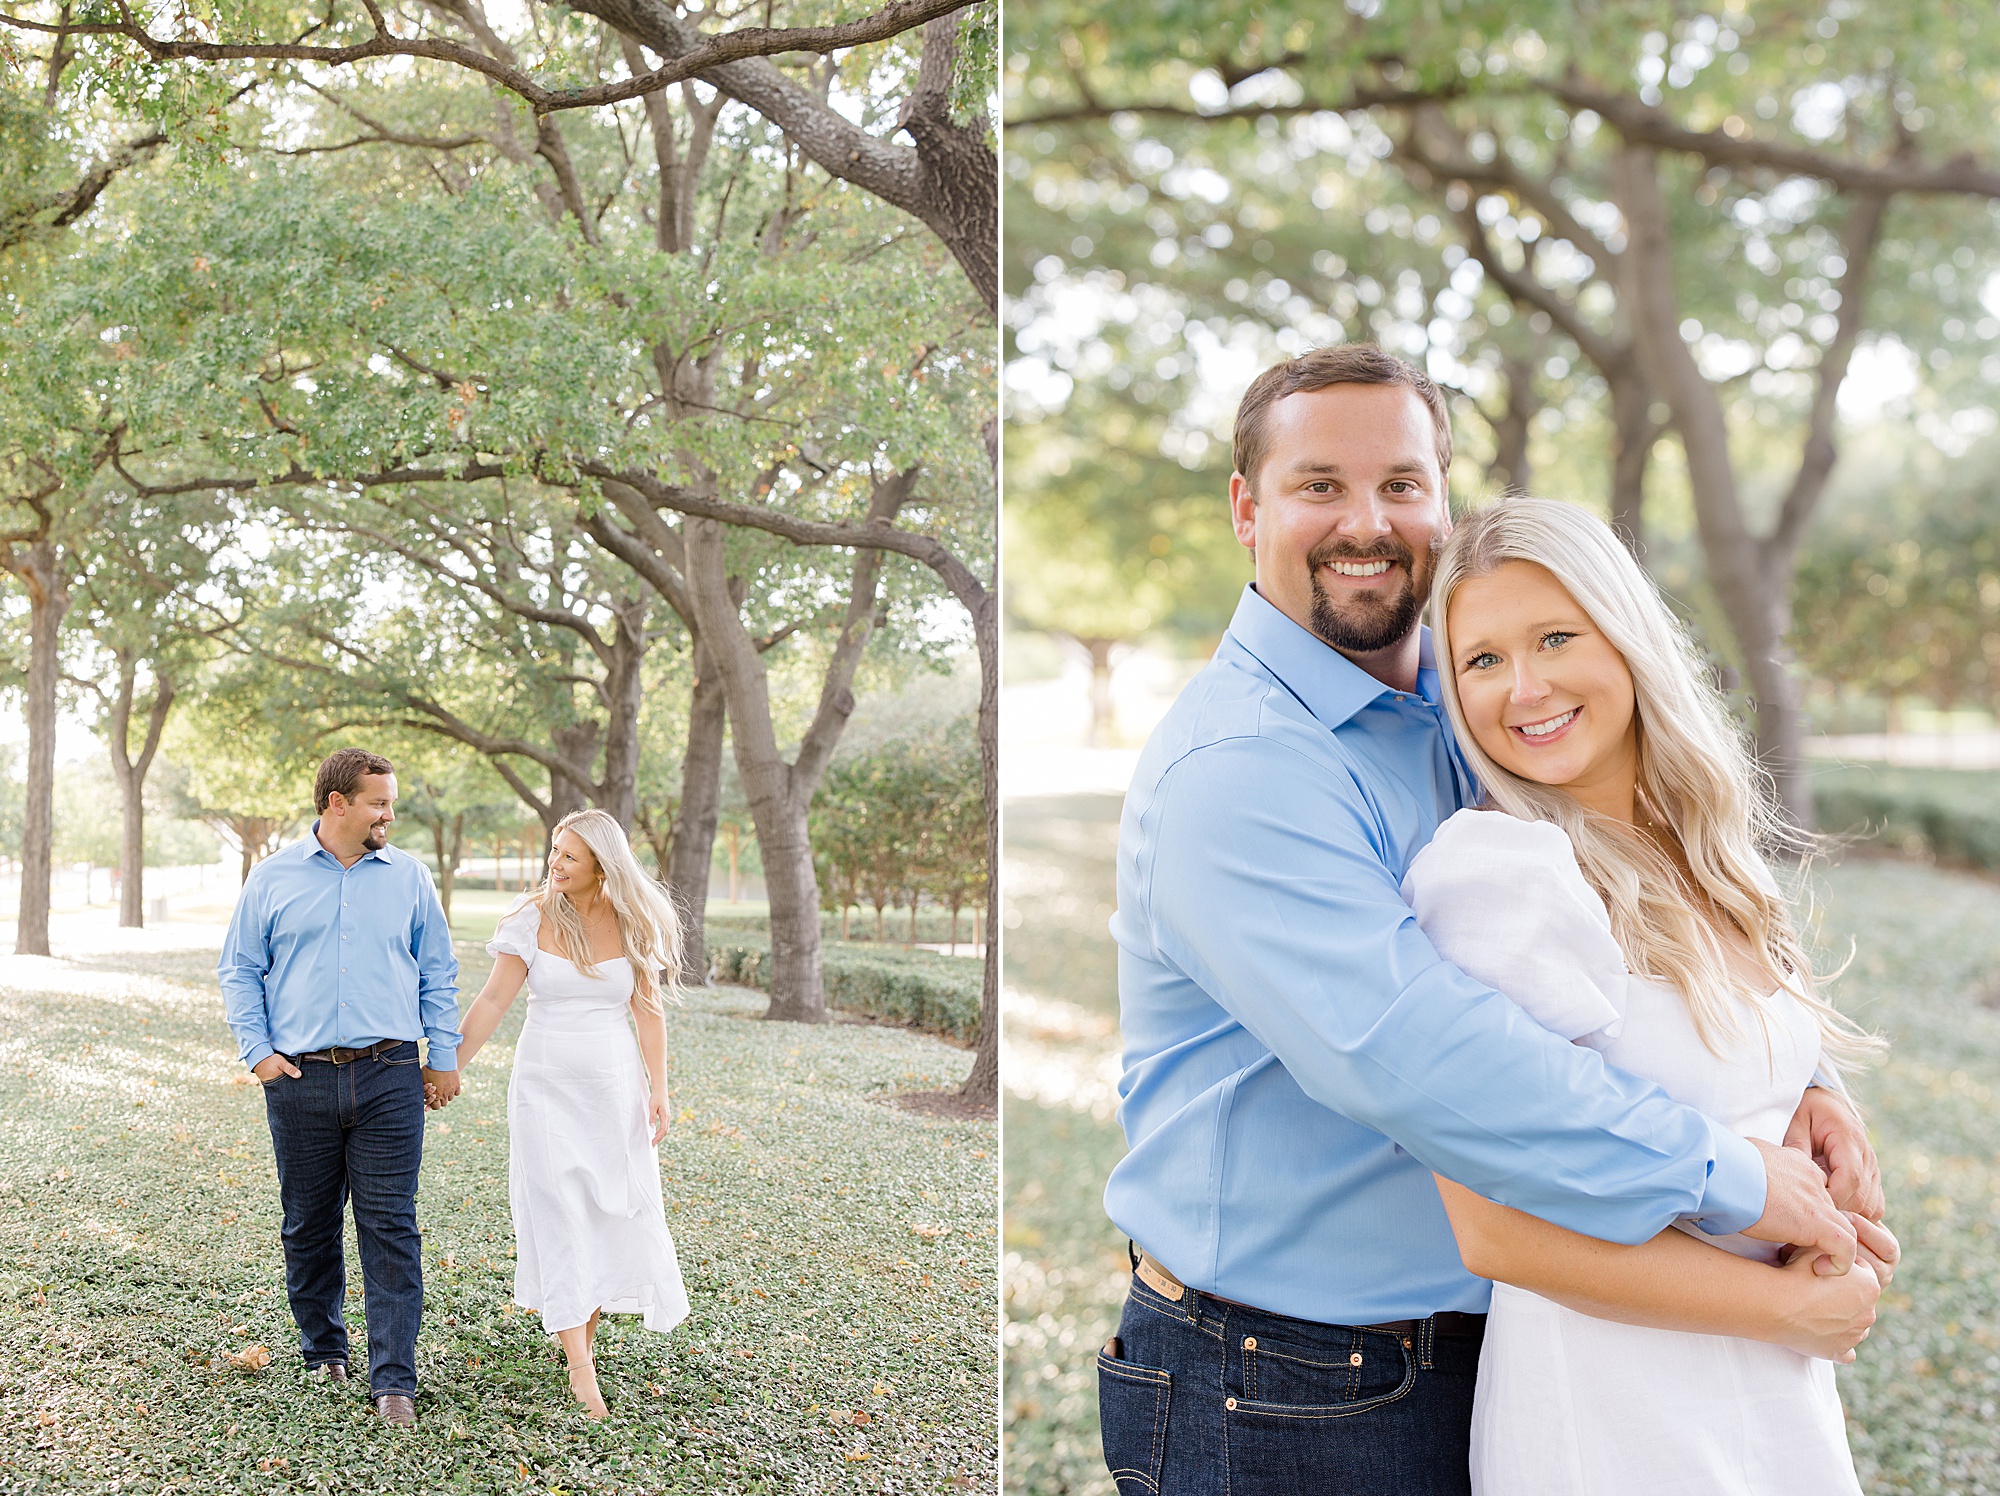 summertime engagement photos at Kimball Art Museum in the grove of trees